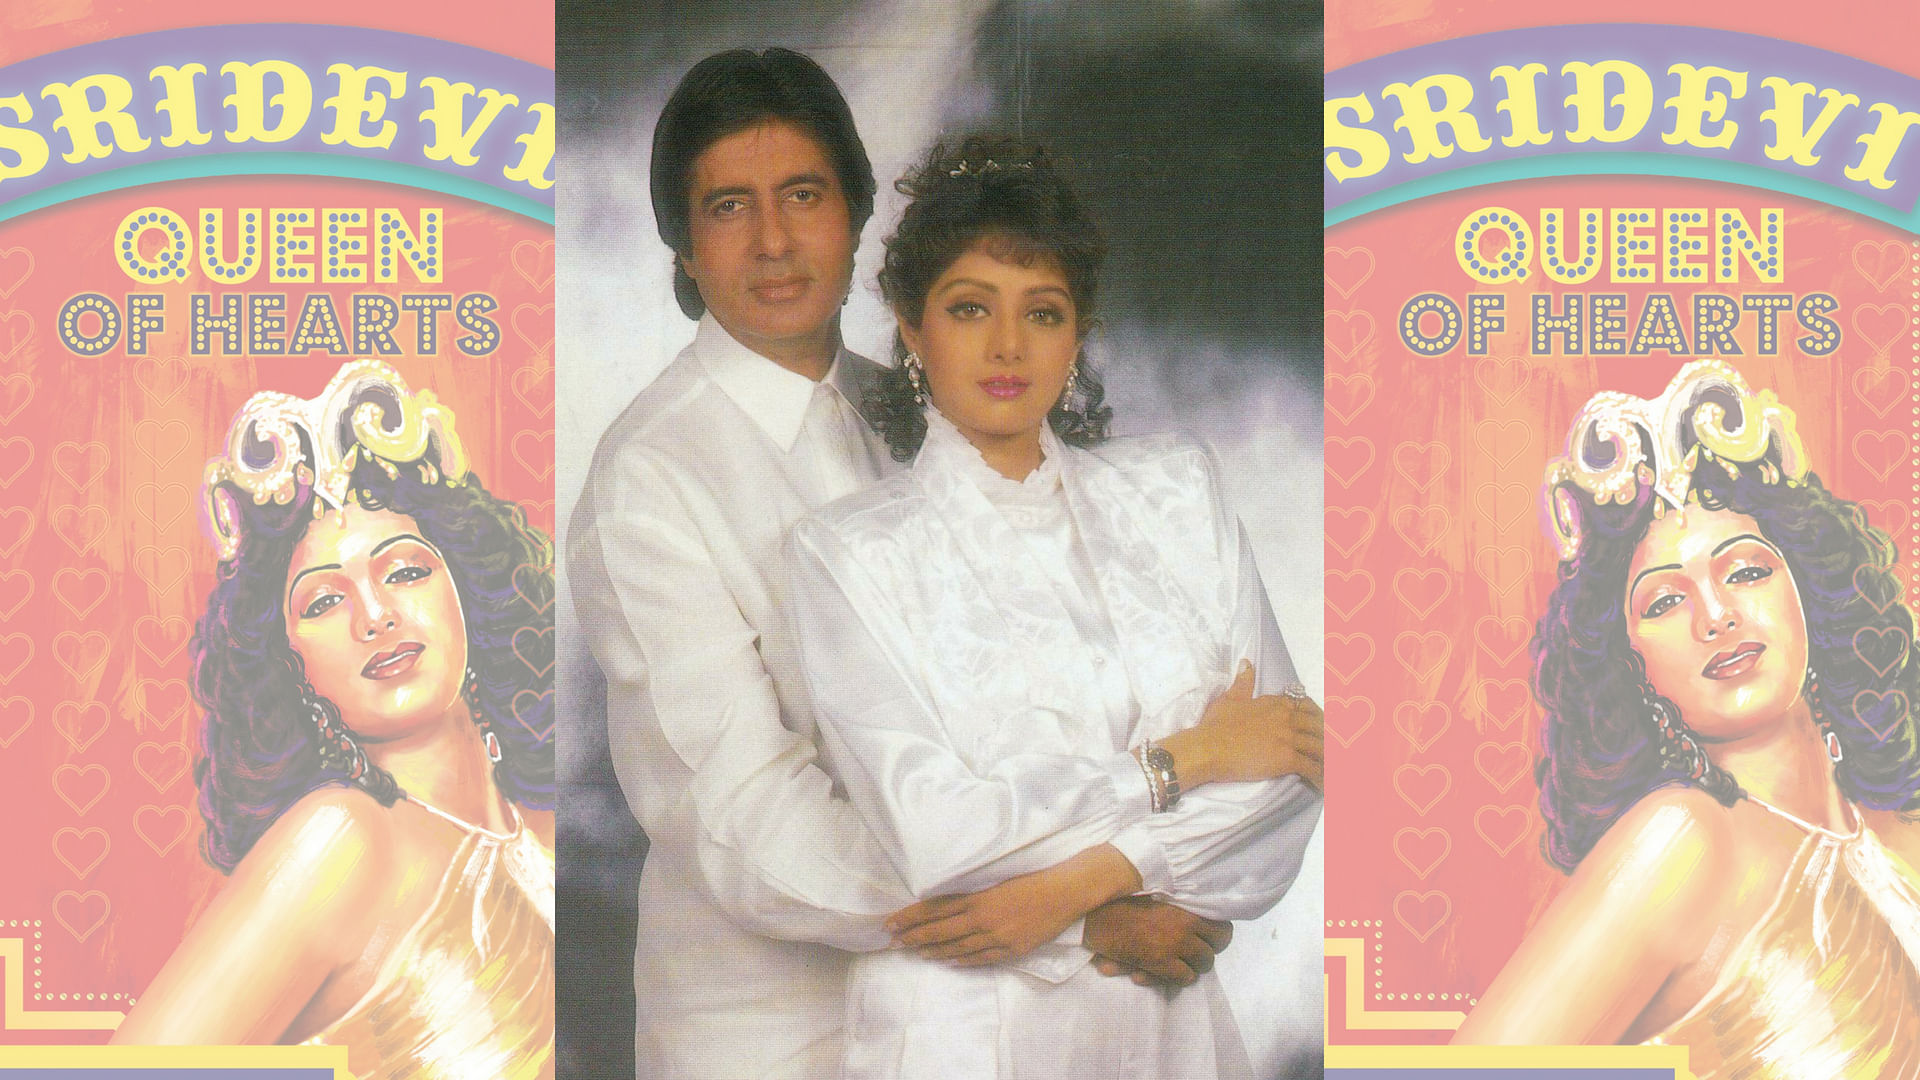 After a point Sridevi refused to do bit roles in Amitabh Bachchan starrers.